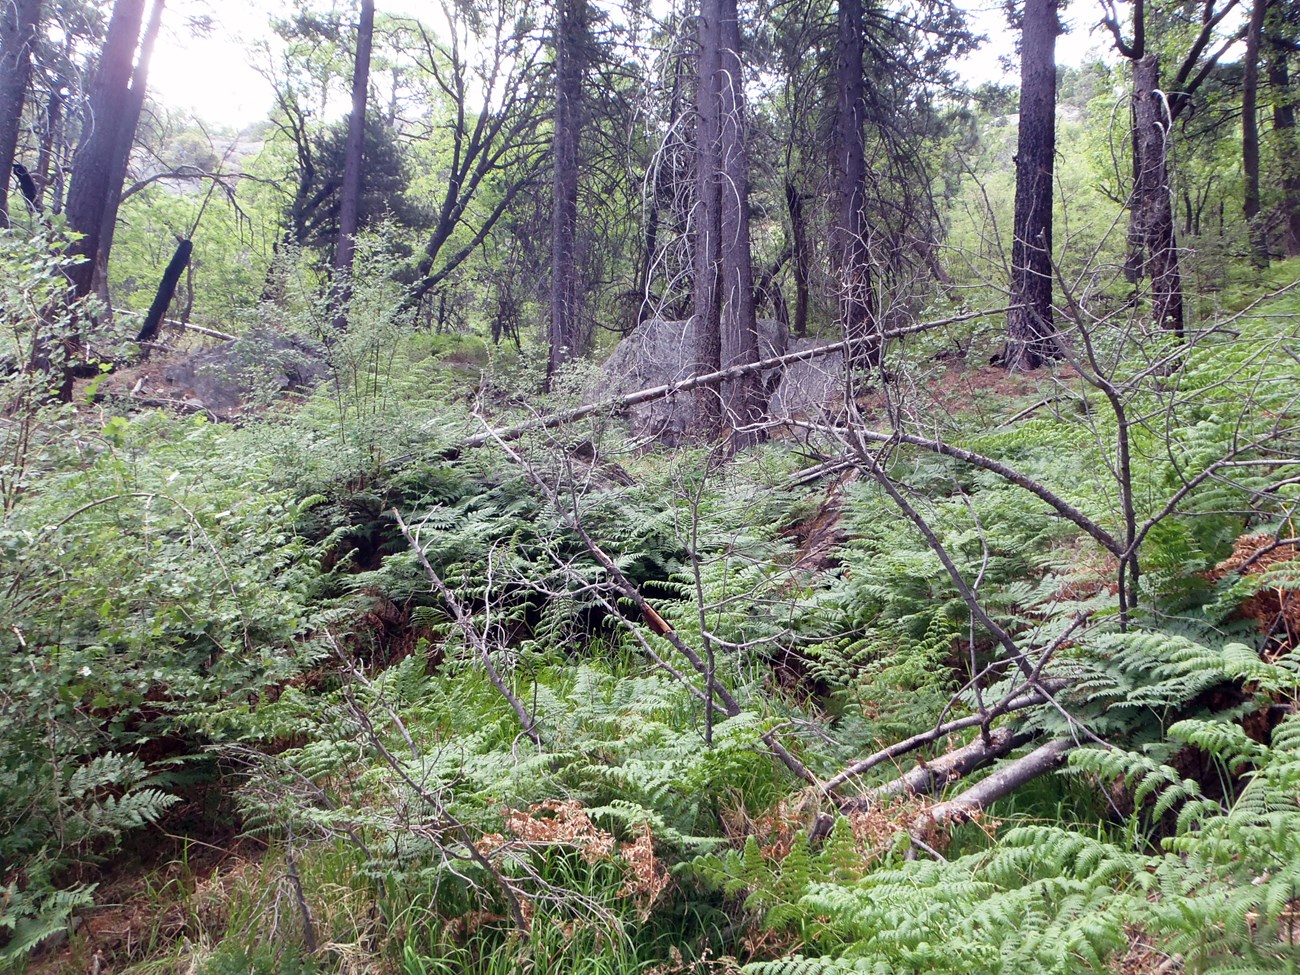 Conifer forest with a dense understory of ferns and grass.